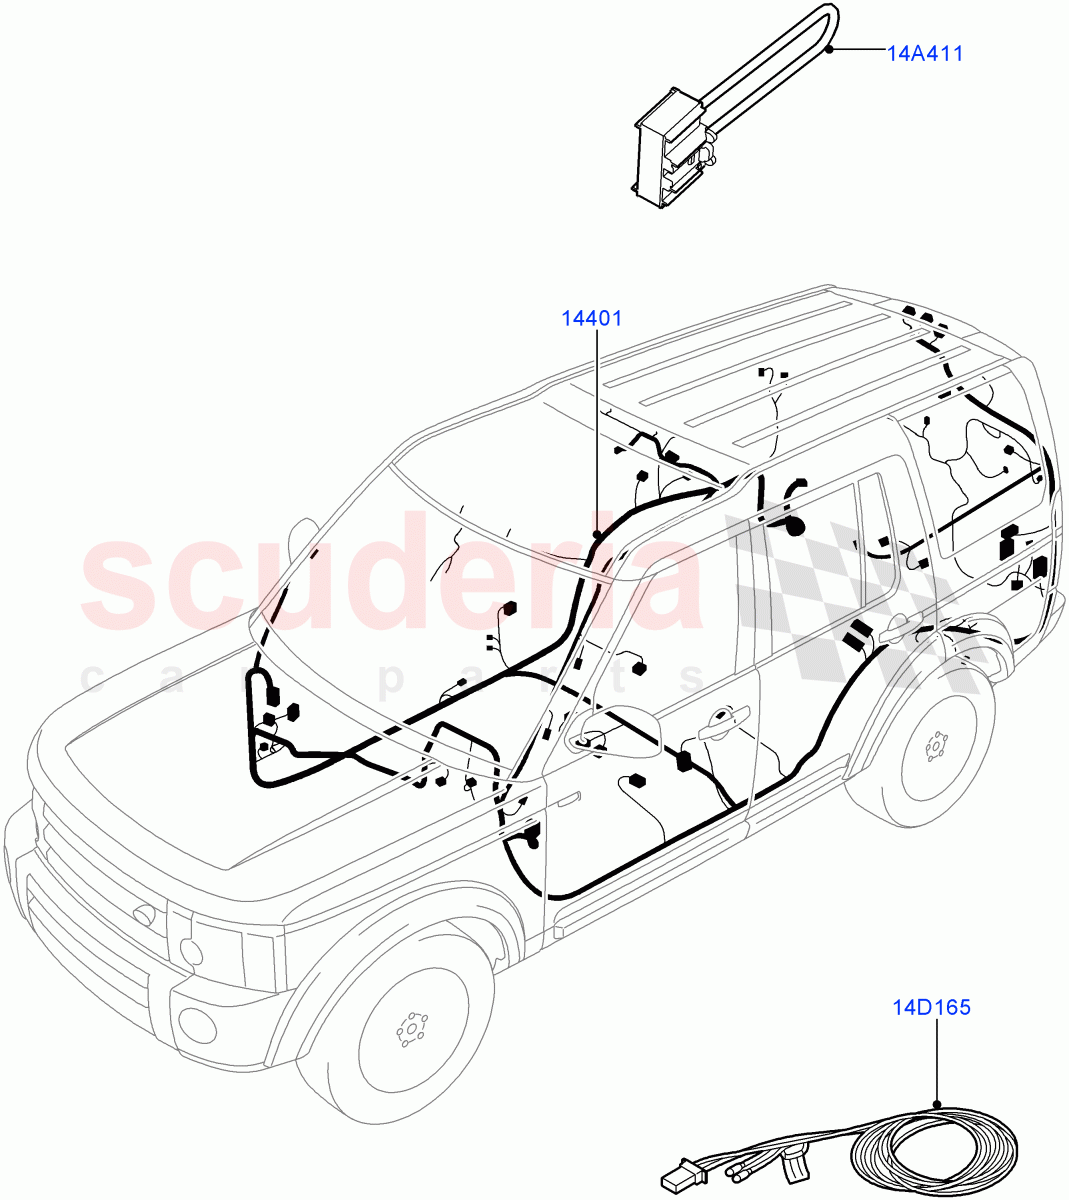 Electrical Wiring - Engine And Dash(Main Harness)((V)FROMAA000001,(V)TOAA999999) of Land Rover Land Rover Discovery 4 (2010-2016) [4.0 Petrol V6]